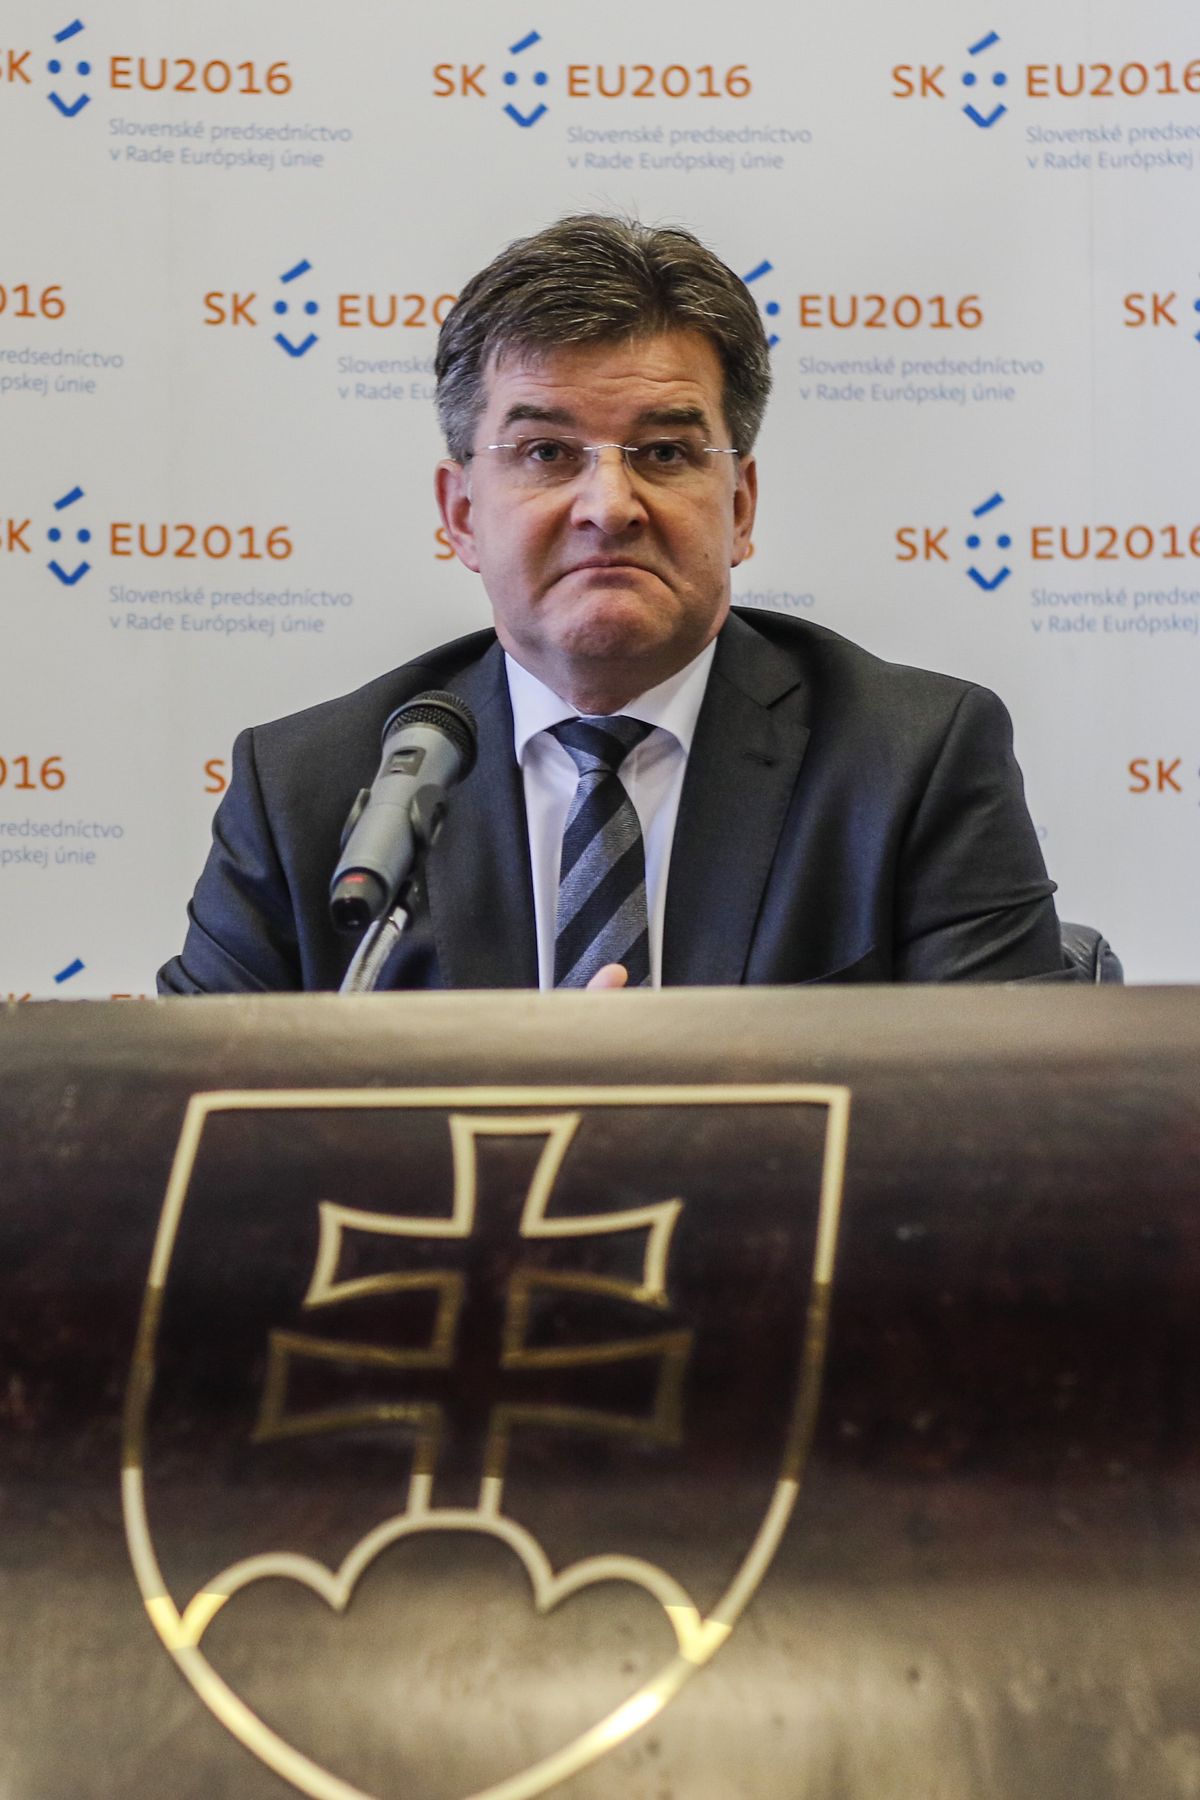 Lajcak: Slovakia Has Become Global Player Thanks to UN Campaign